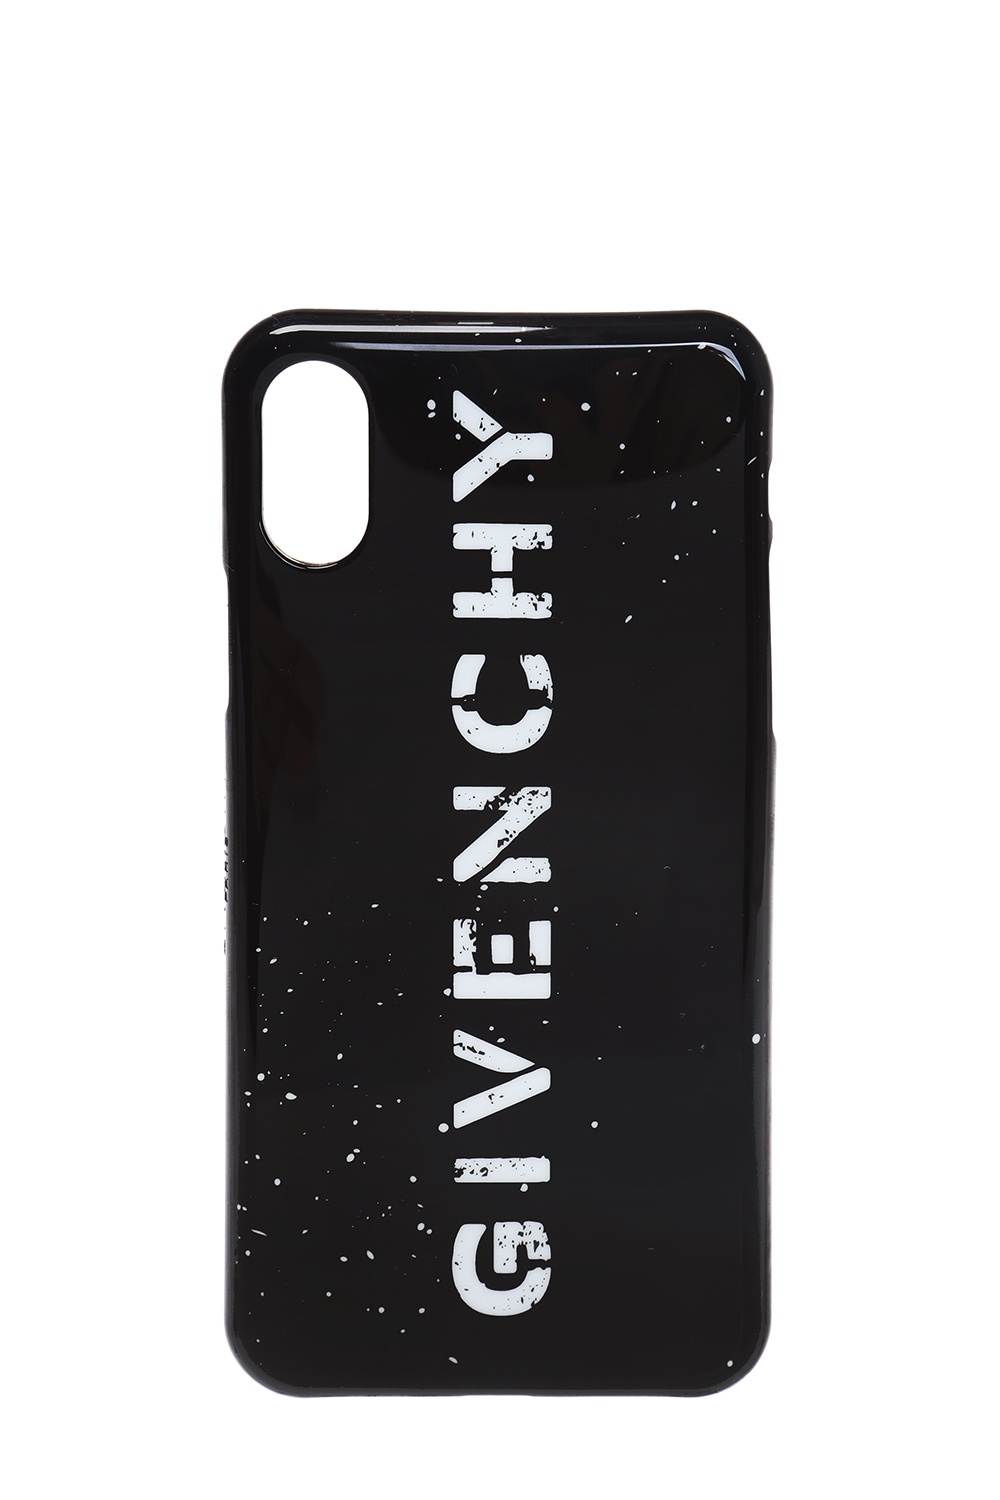 Iphone X Givenchy Sale, SAVE 40% - cocoguate.com